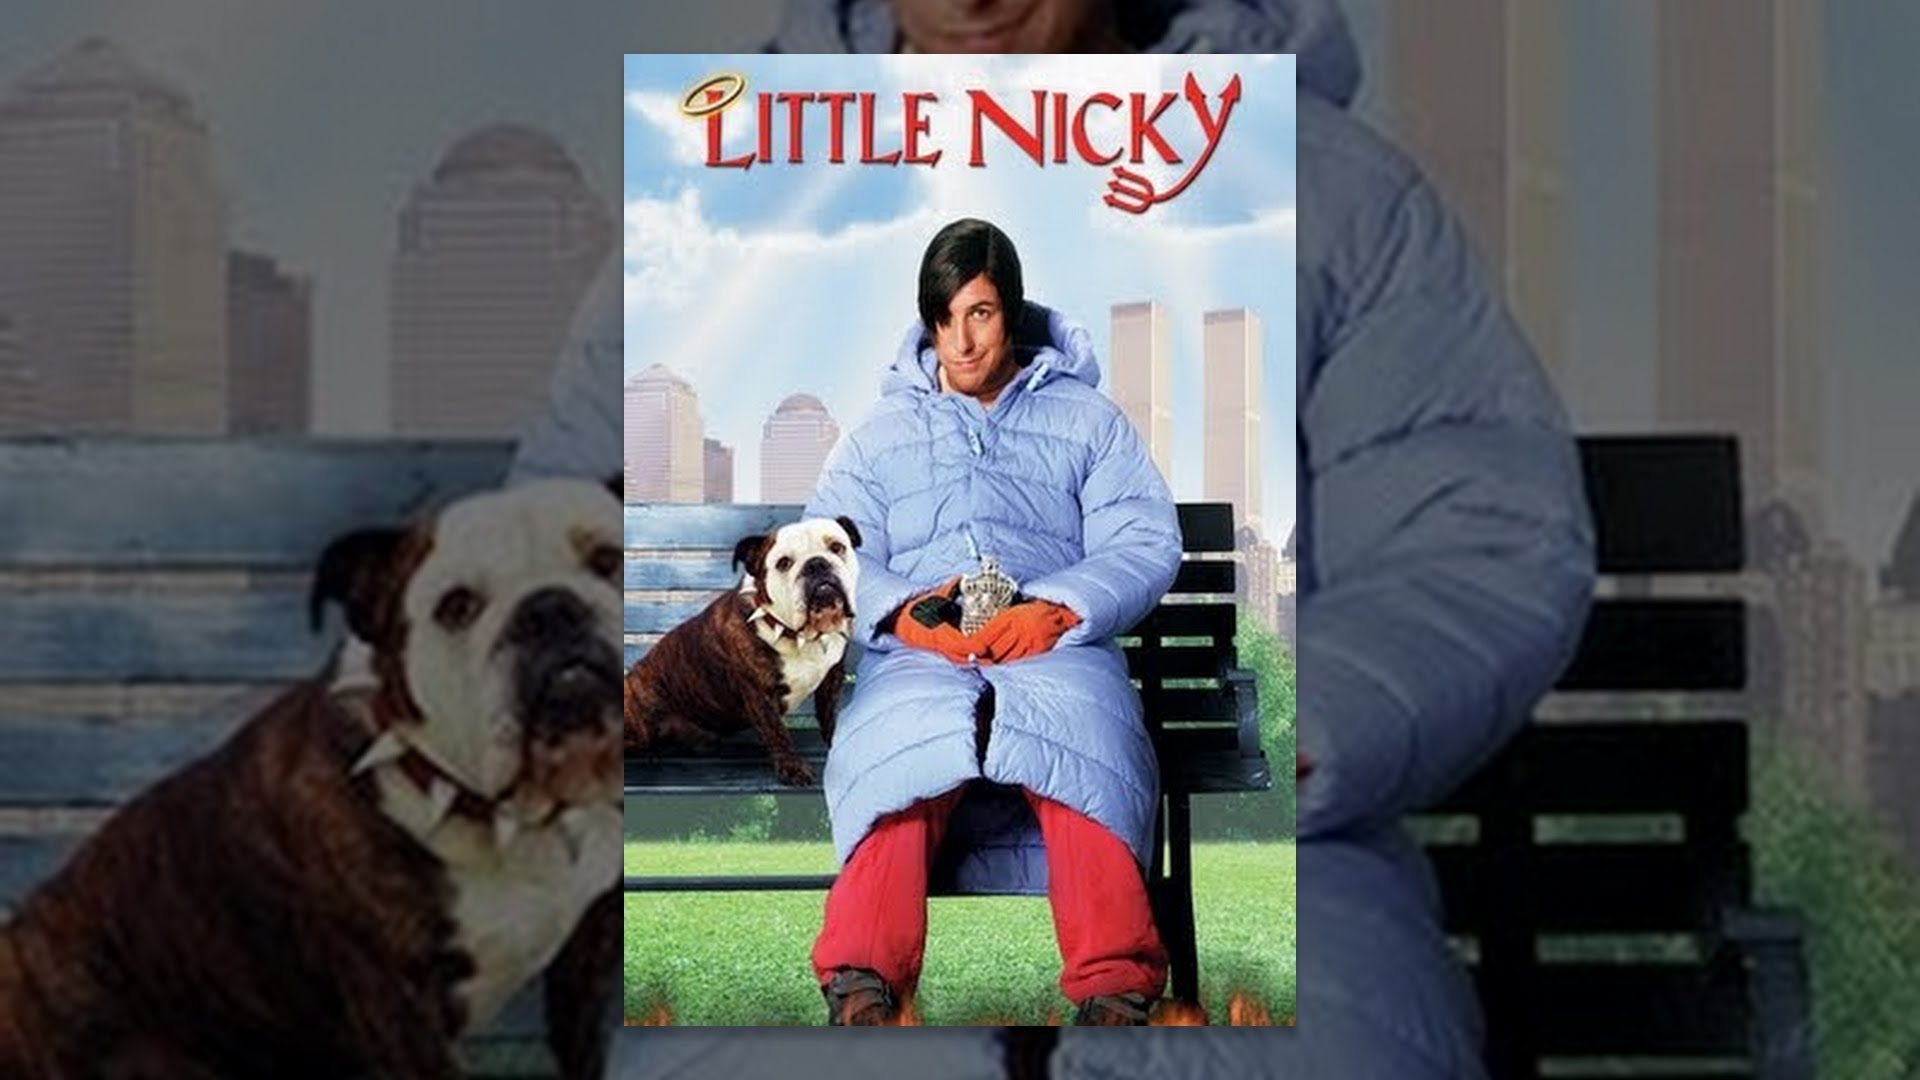 ankit vaghela recommends watch little nicky online free pic